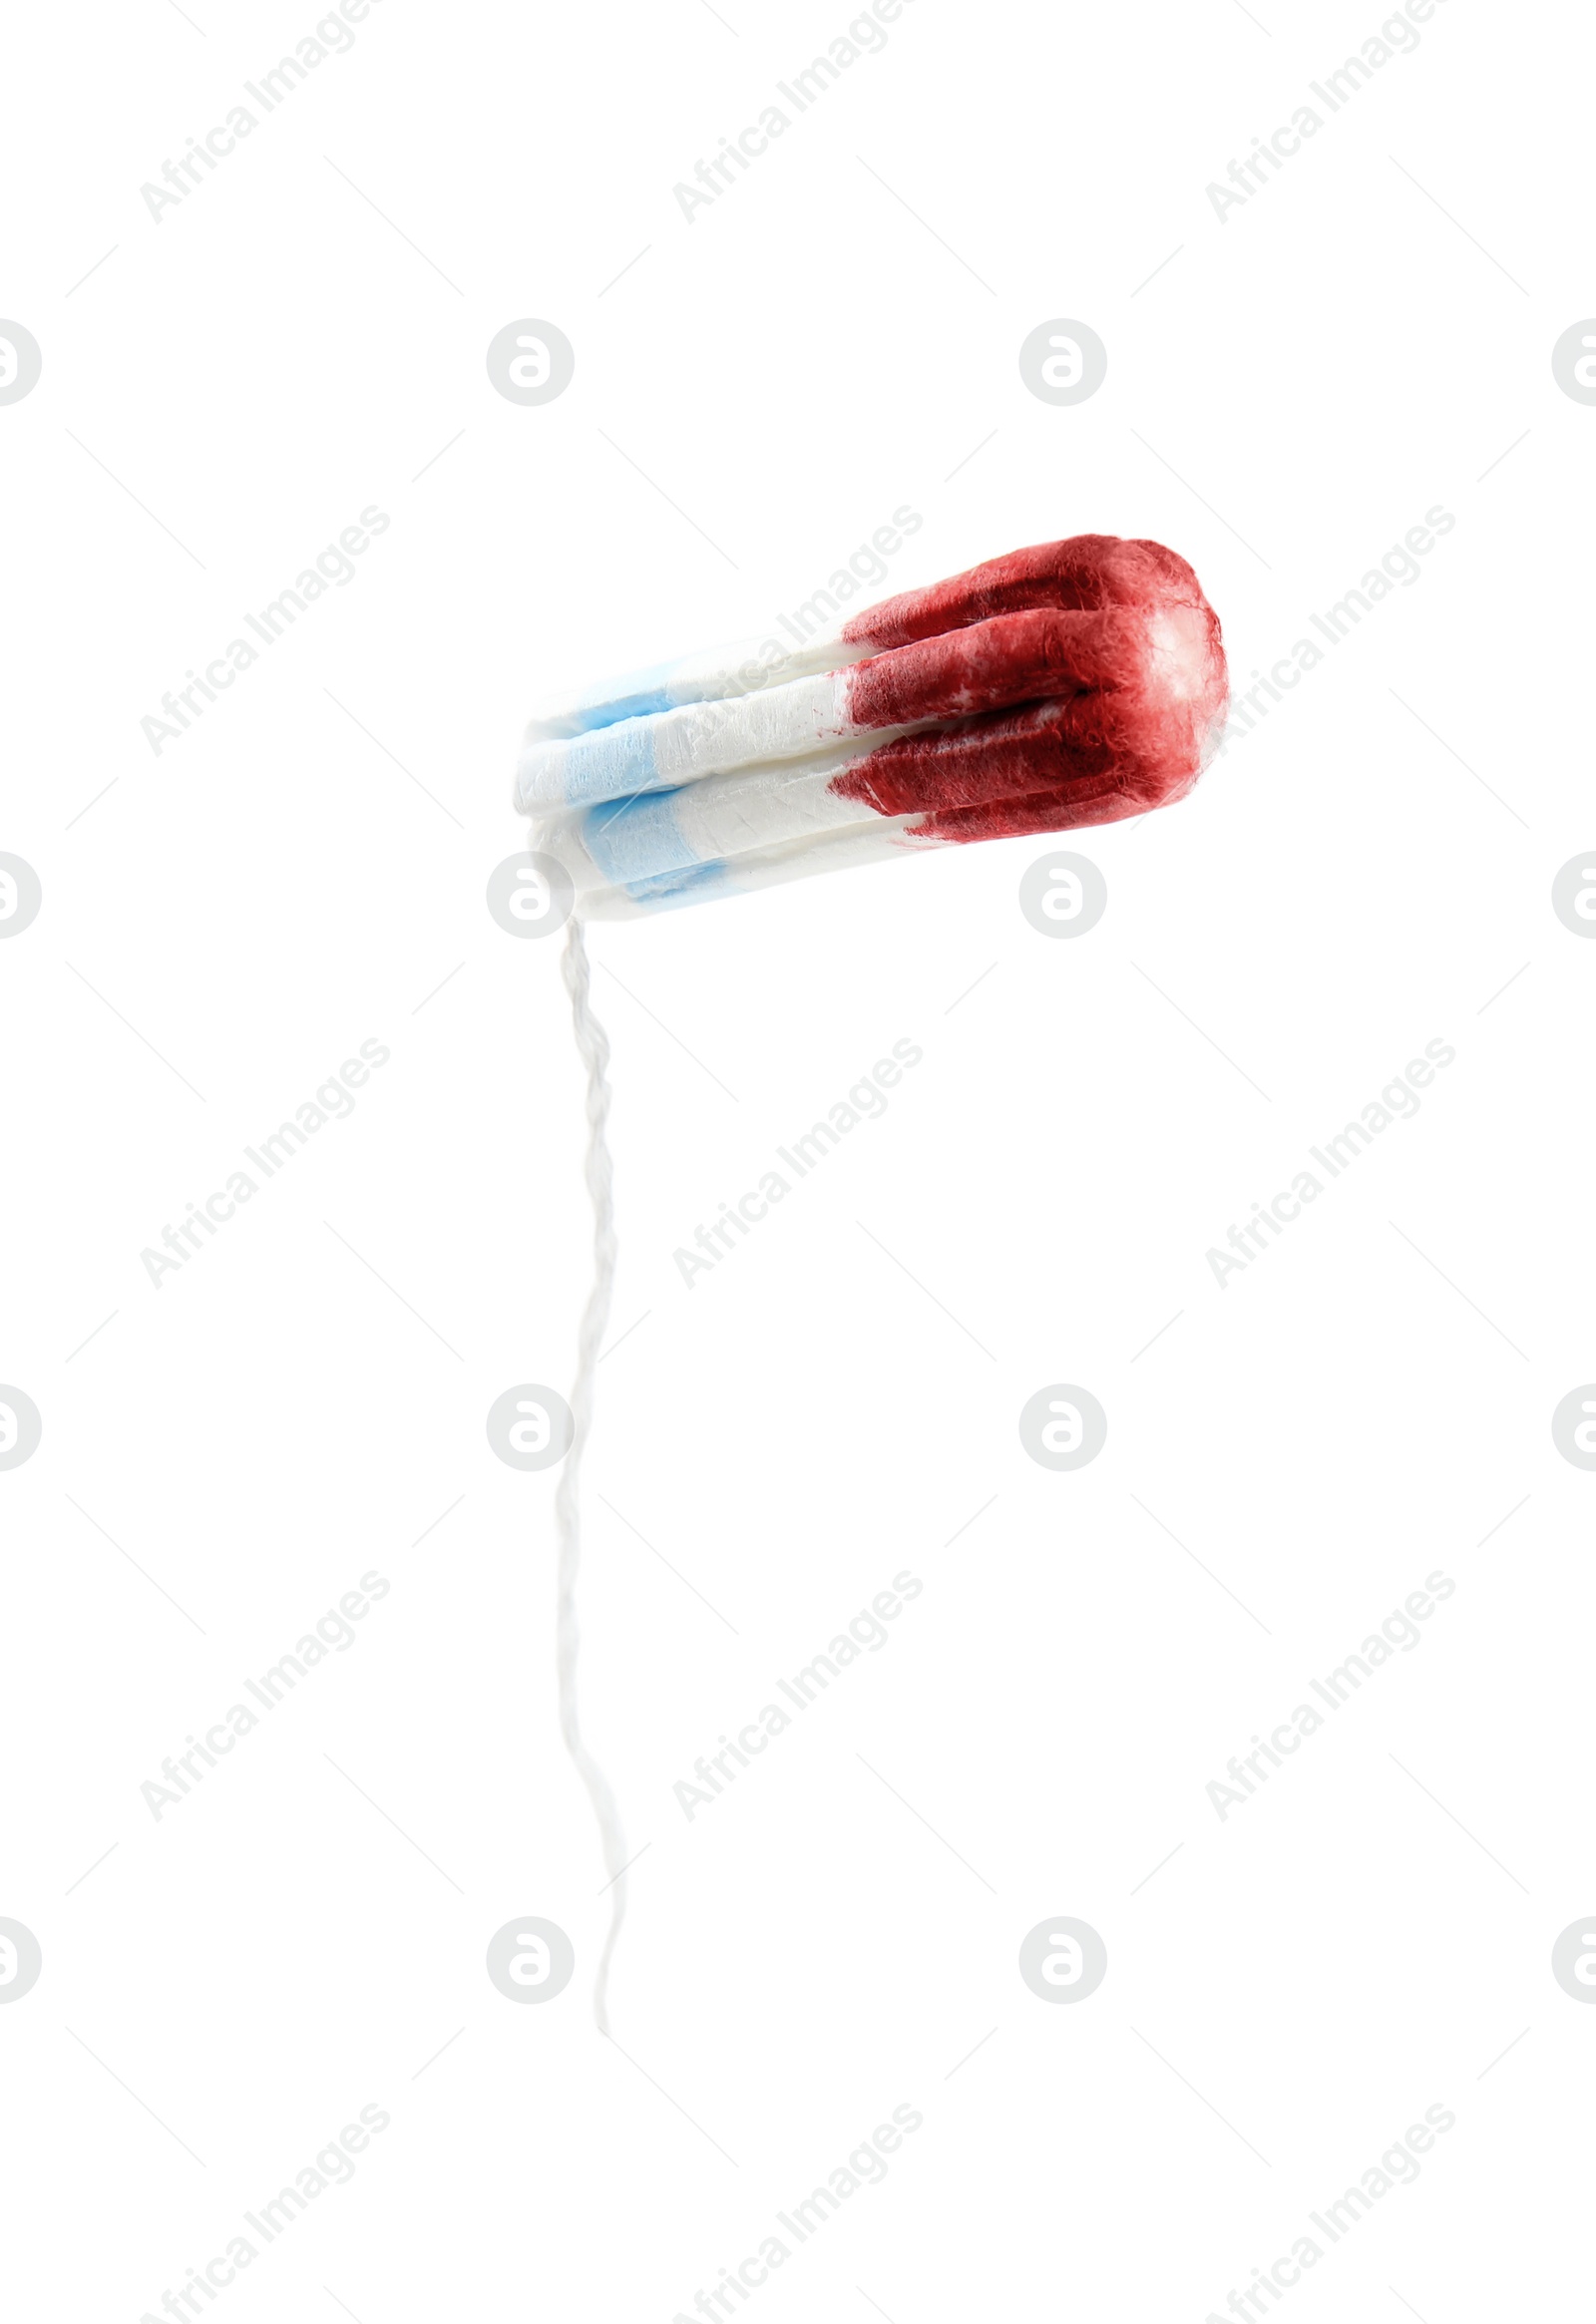 Photo of Used cotton tampon isolated on white. Menstrual hygienic product